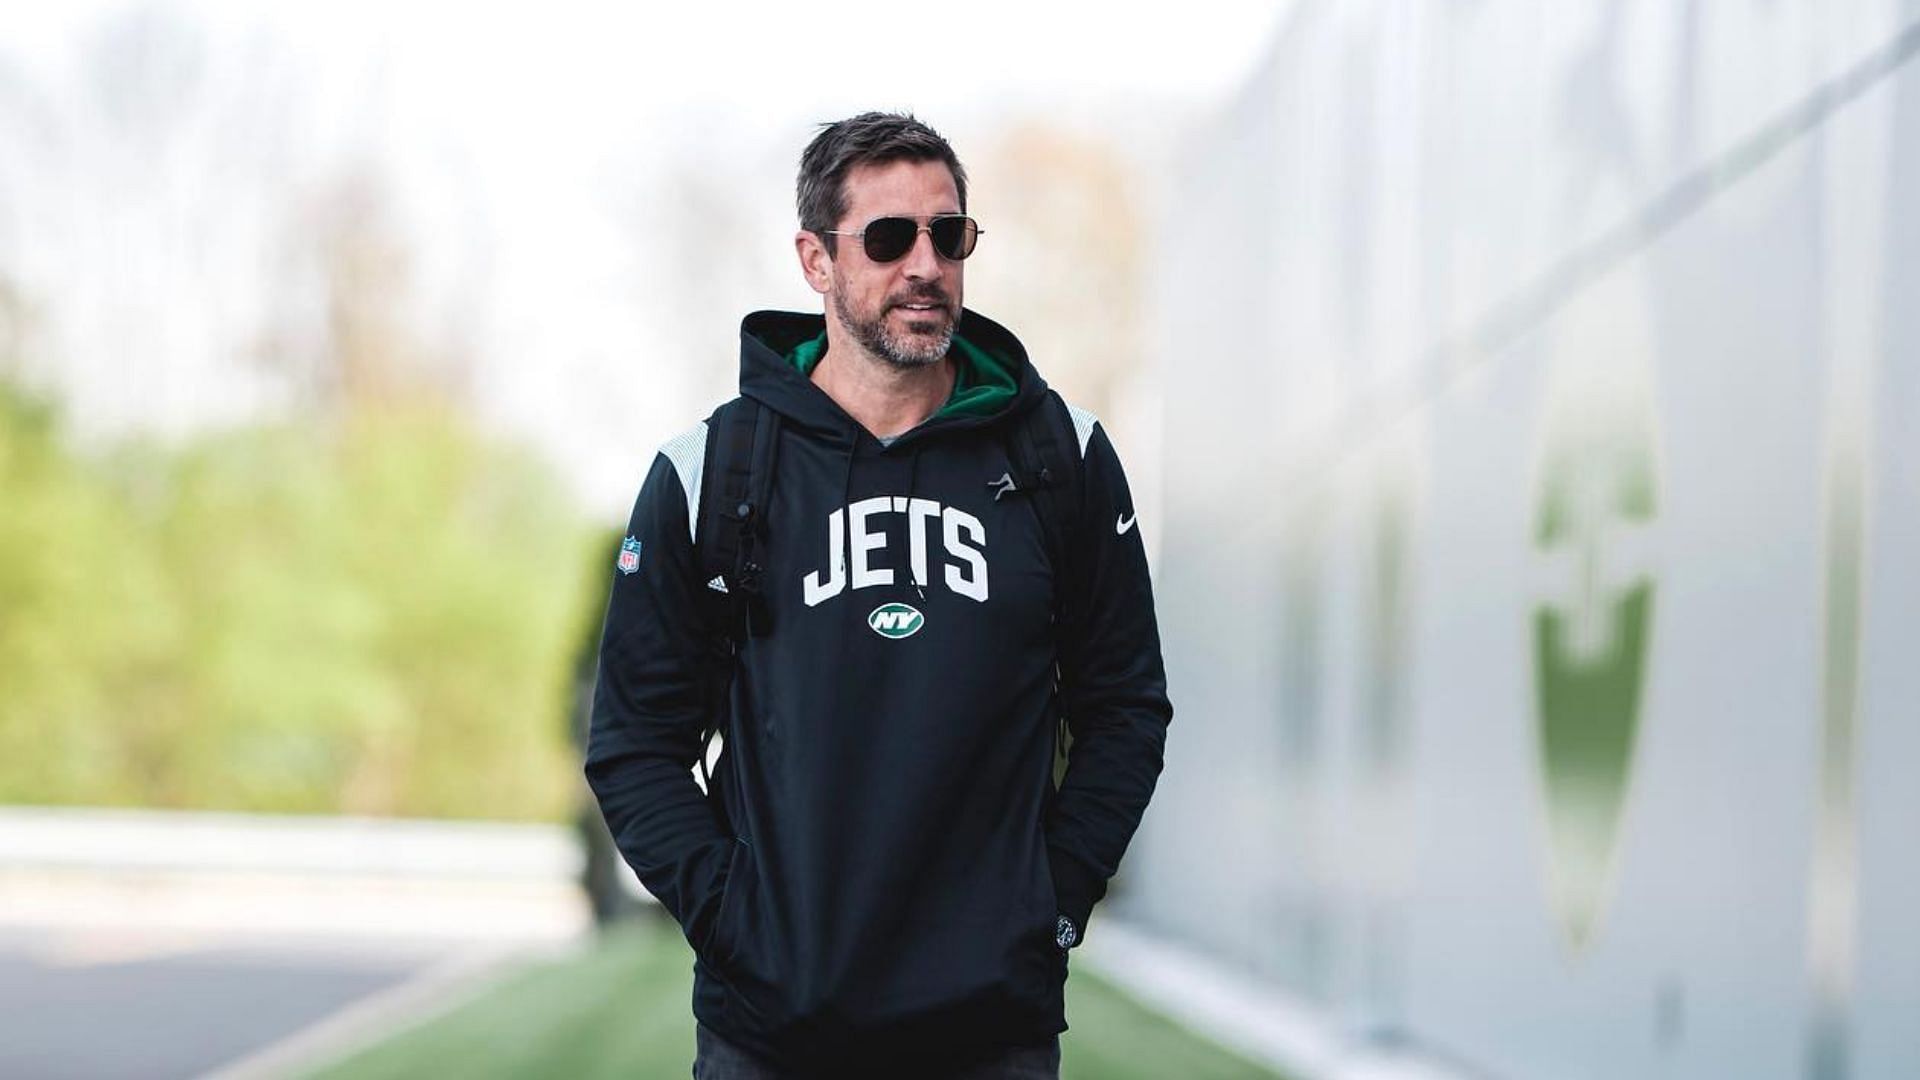 Aaron Rodgers makes first appearance as Jets QB